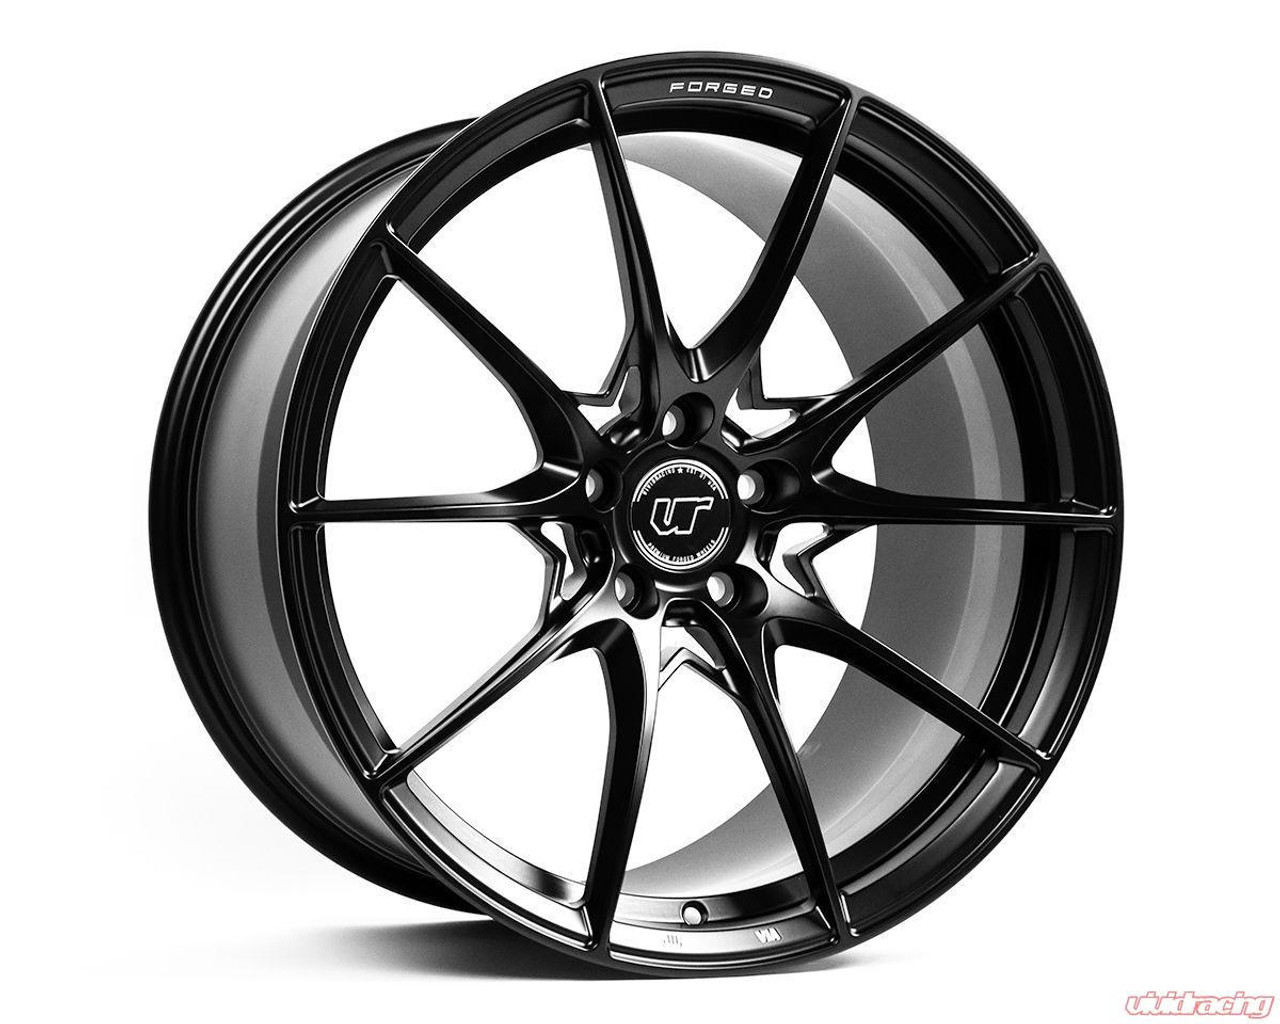 Vivid Racing VR Forged D03 Wheel Package Ford Mustang S550 20x10 & 20x11 Matte Black - VRF-D03-S550-MBLK 